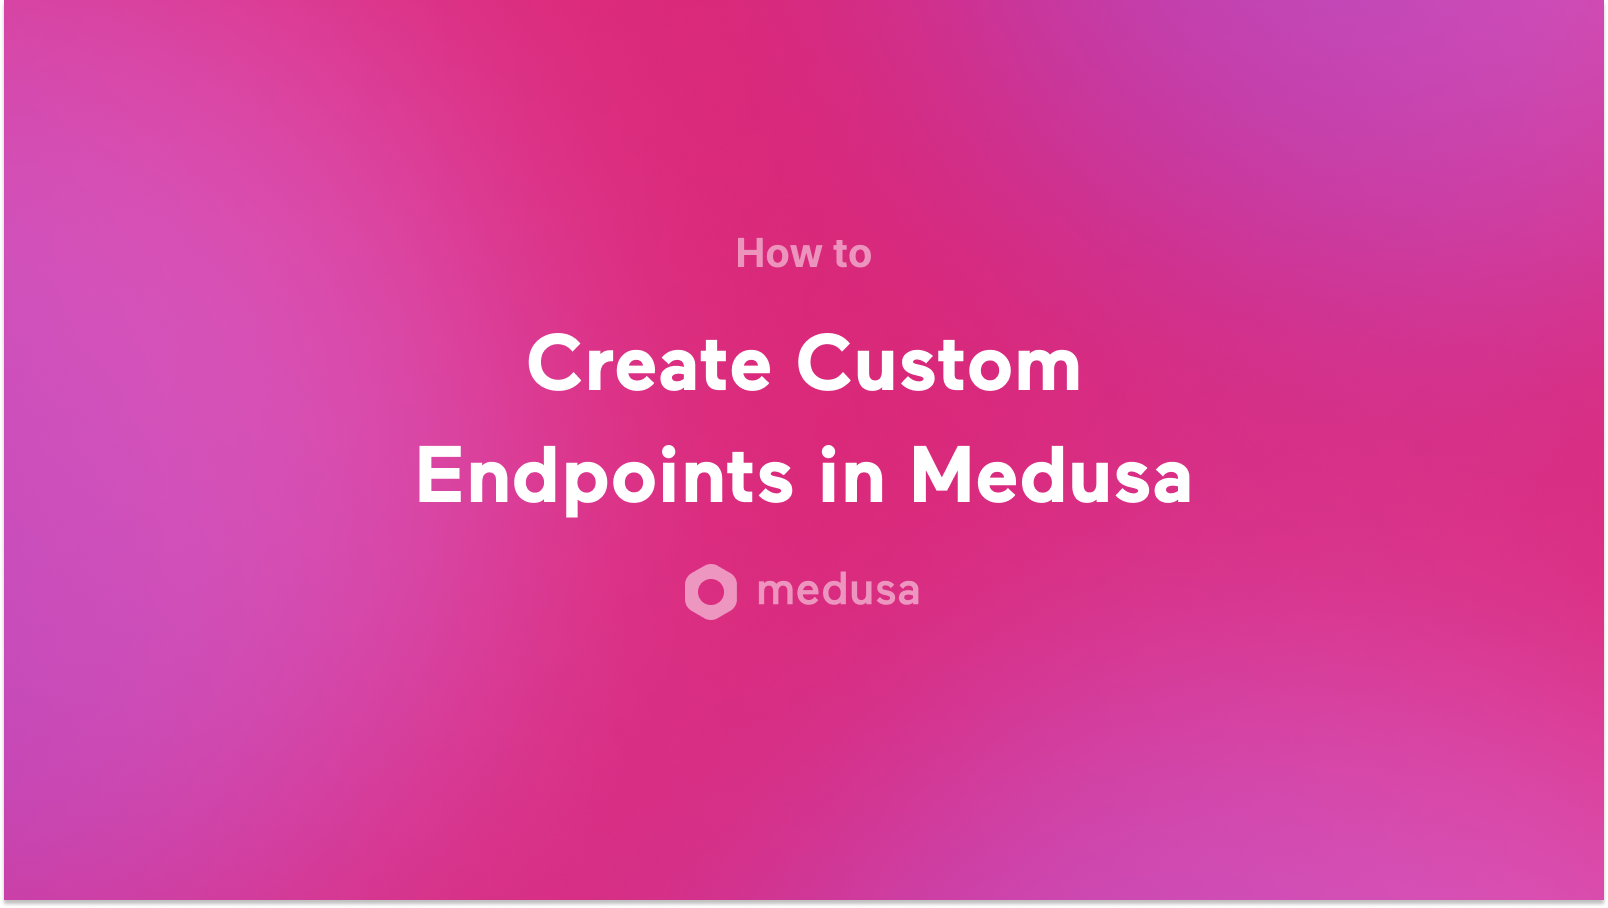 How to Create Custom Endpoints in Medusa